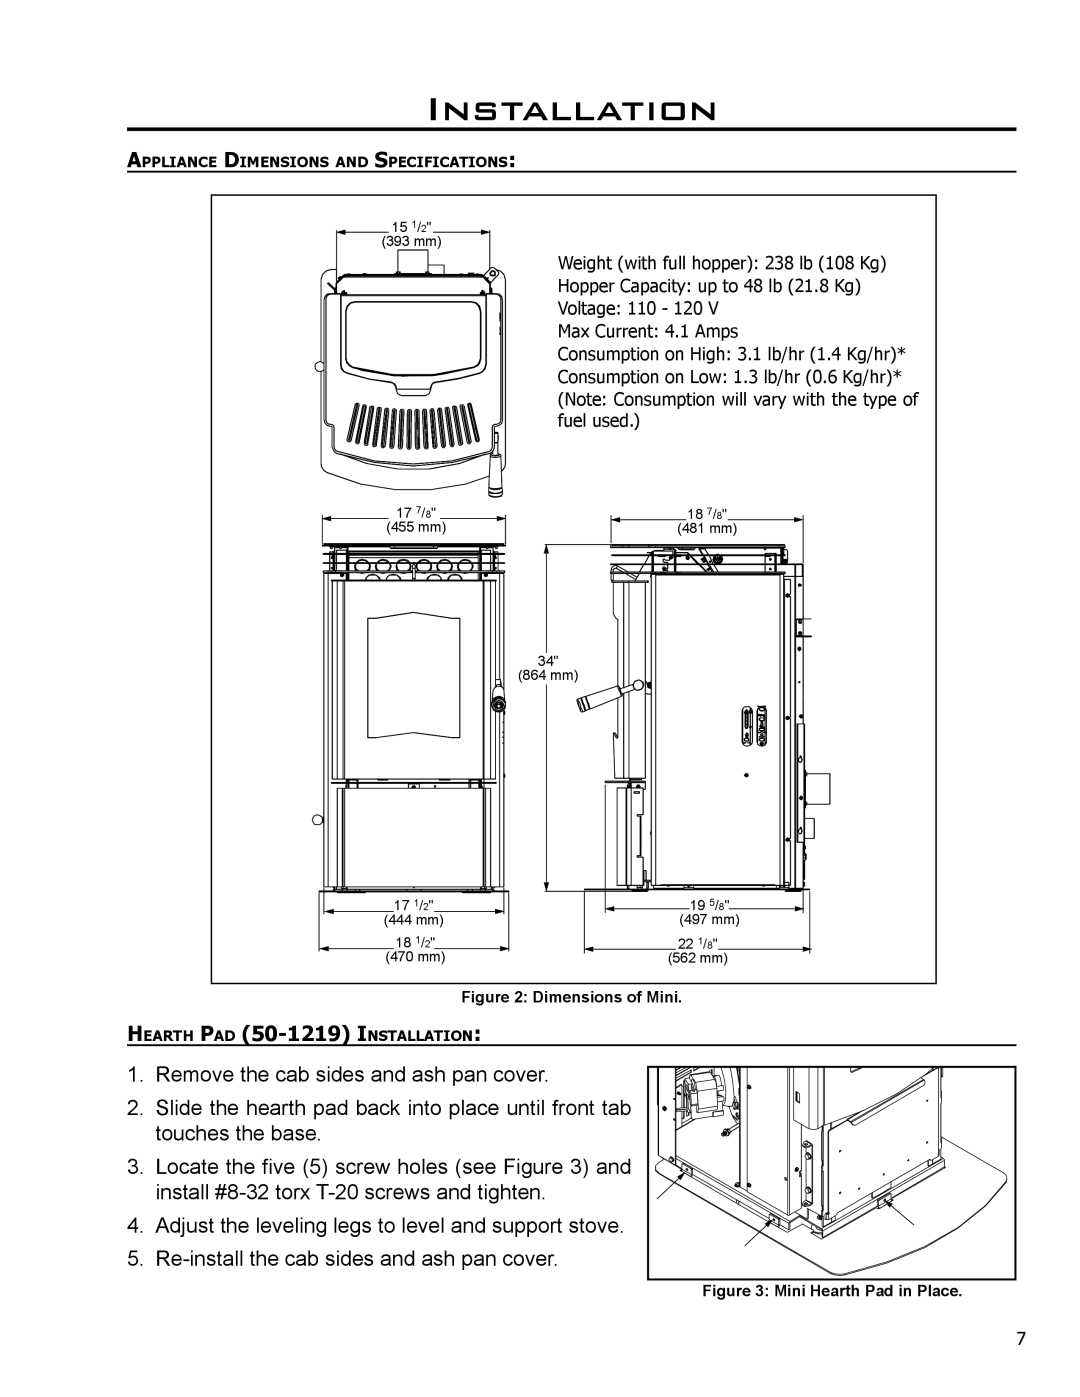 Enviro C-11150 technical manual Installation, Remove the cab sides and ash pan cover 